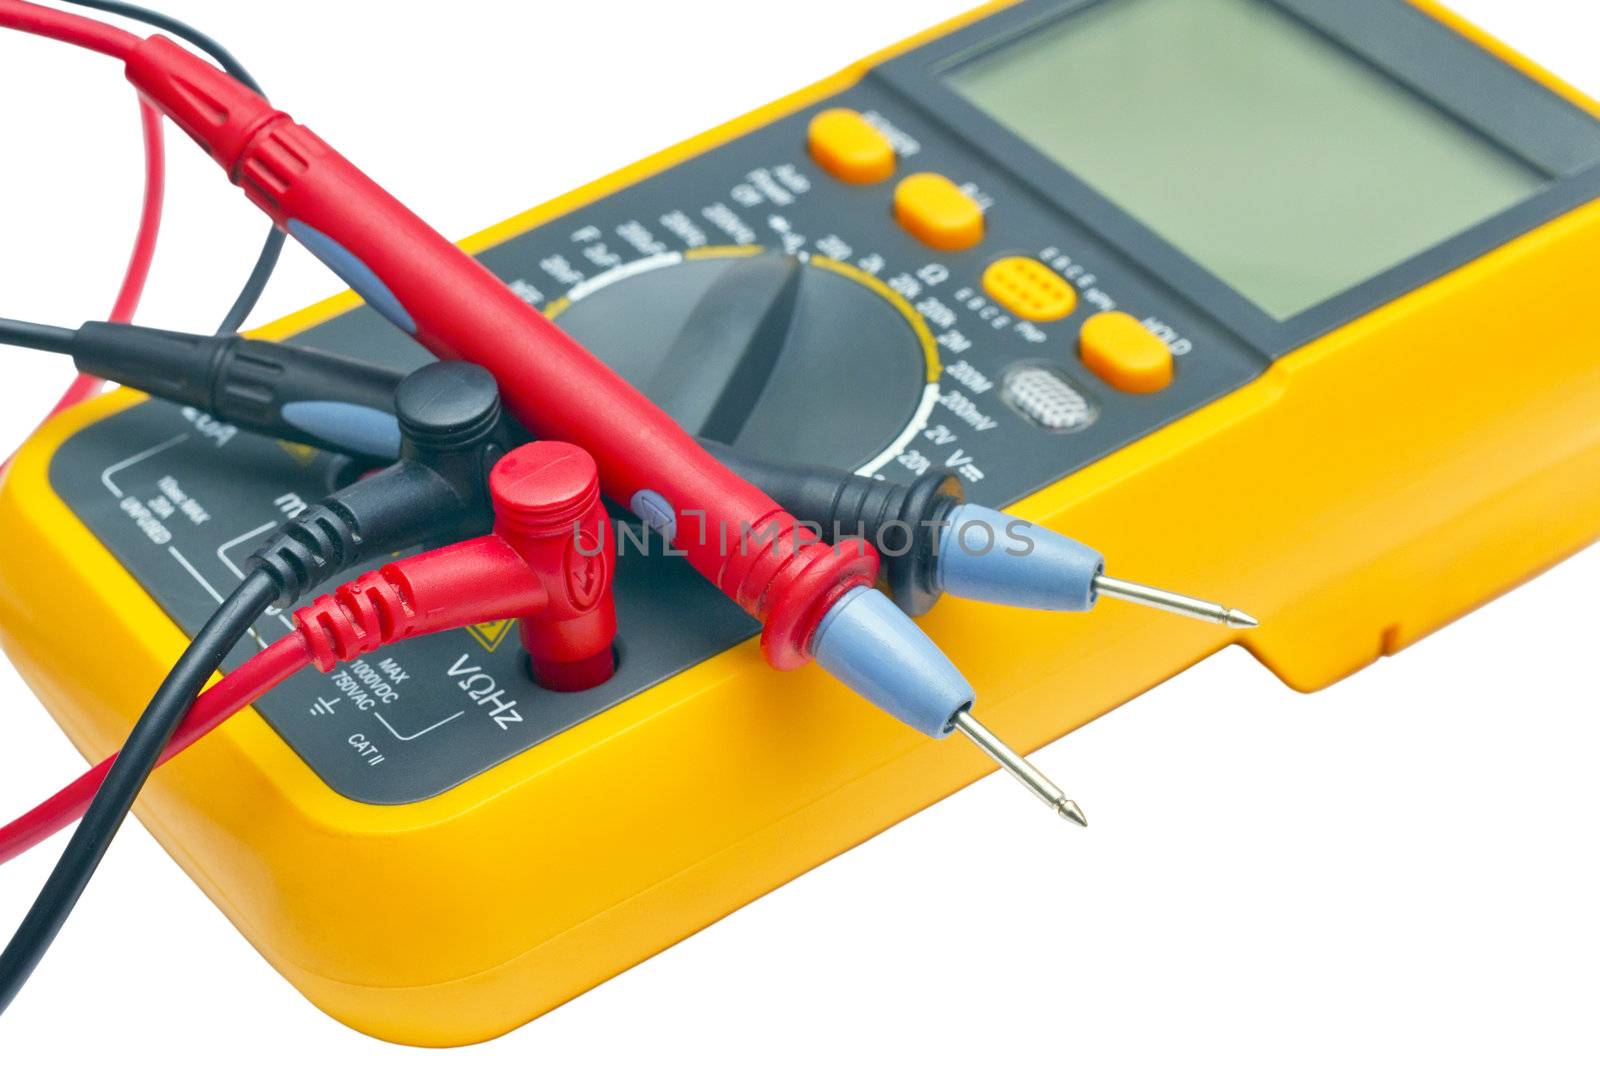 Digital yellow multimeter isolated on white background